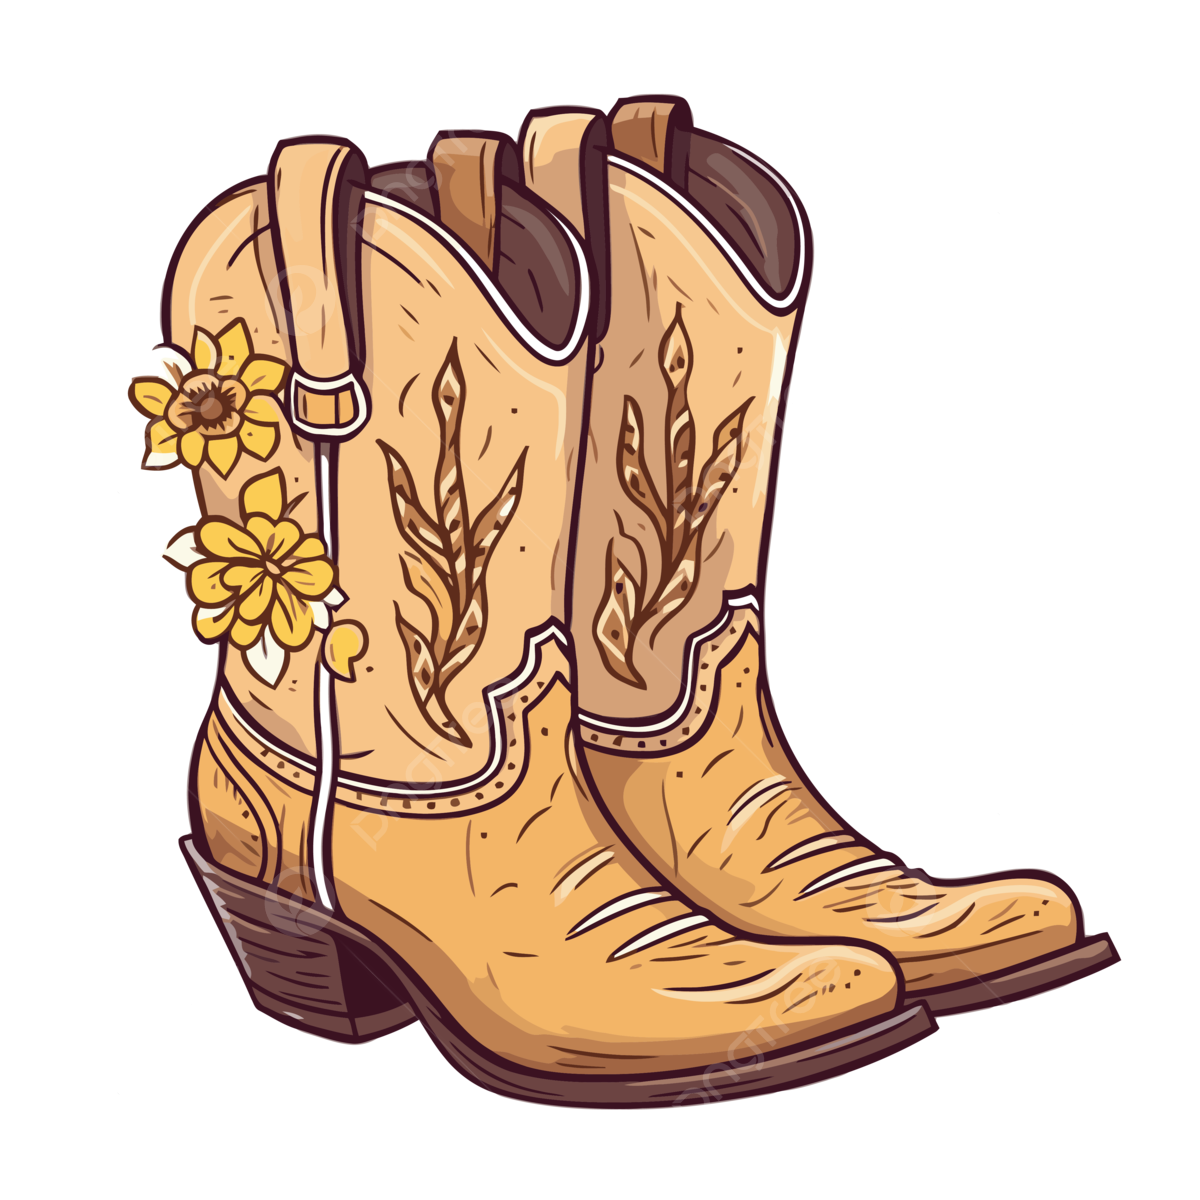 Cowgirl Boot PNG Photos